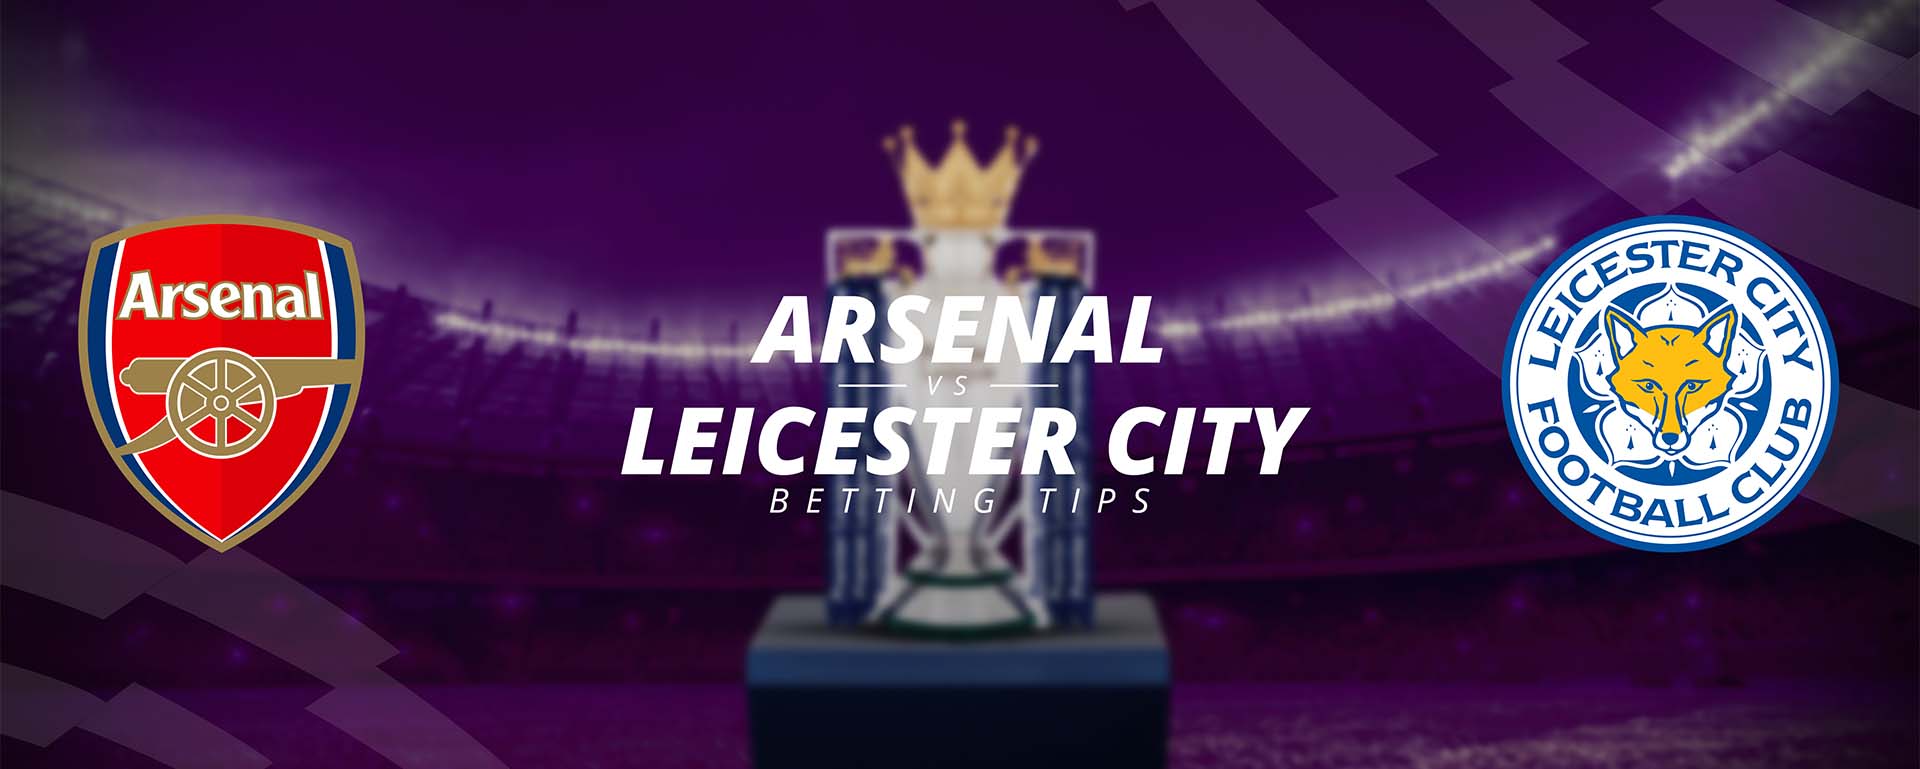 ARSENAL VS LEICESTER CITY: BETTING TIPS